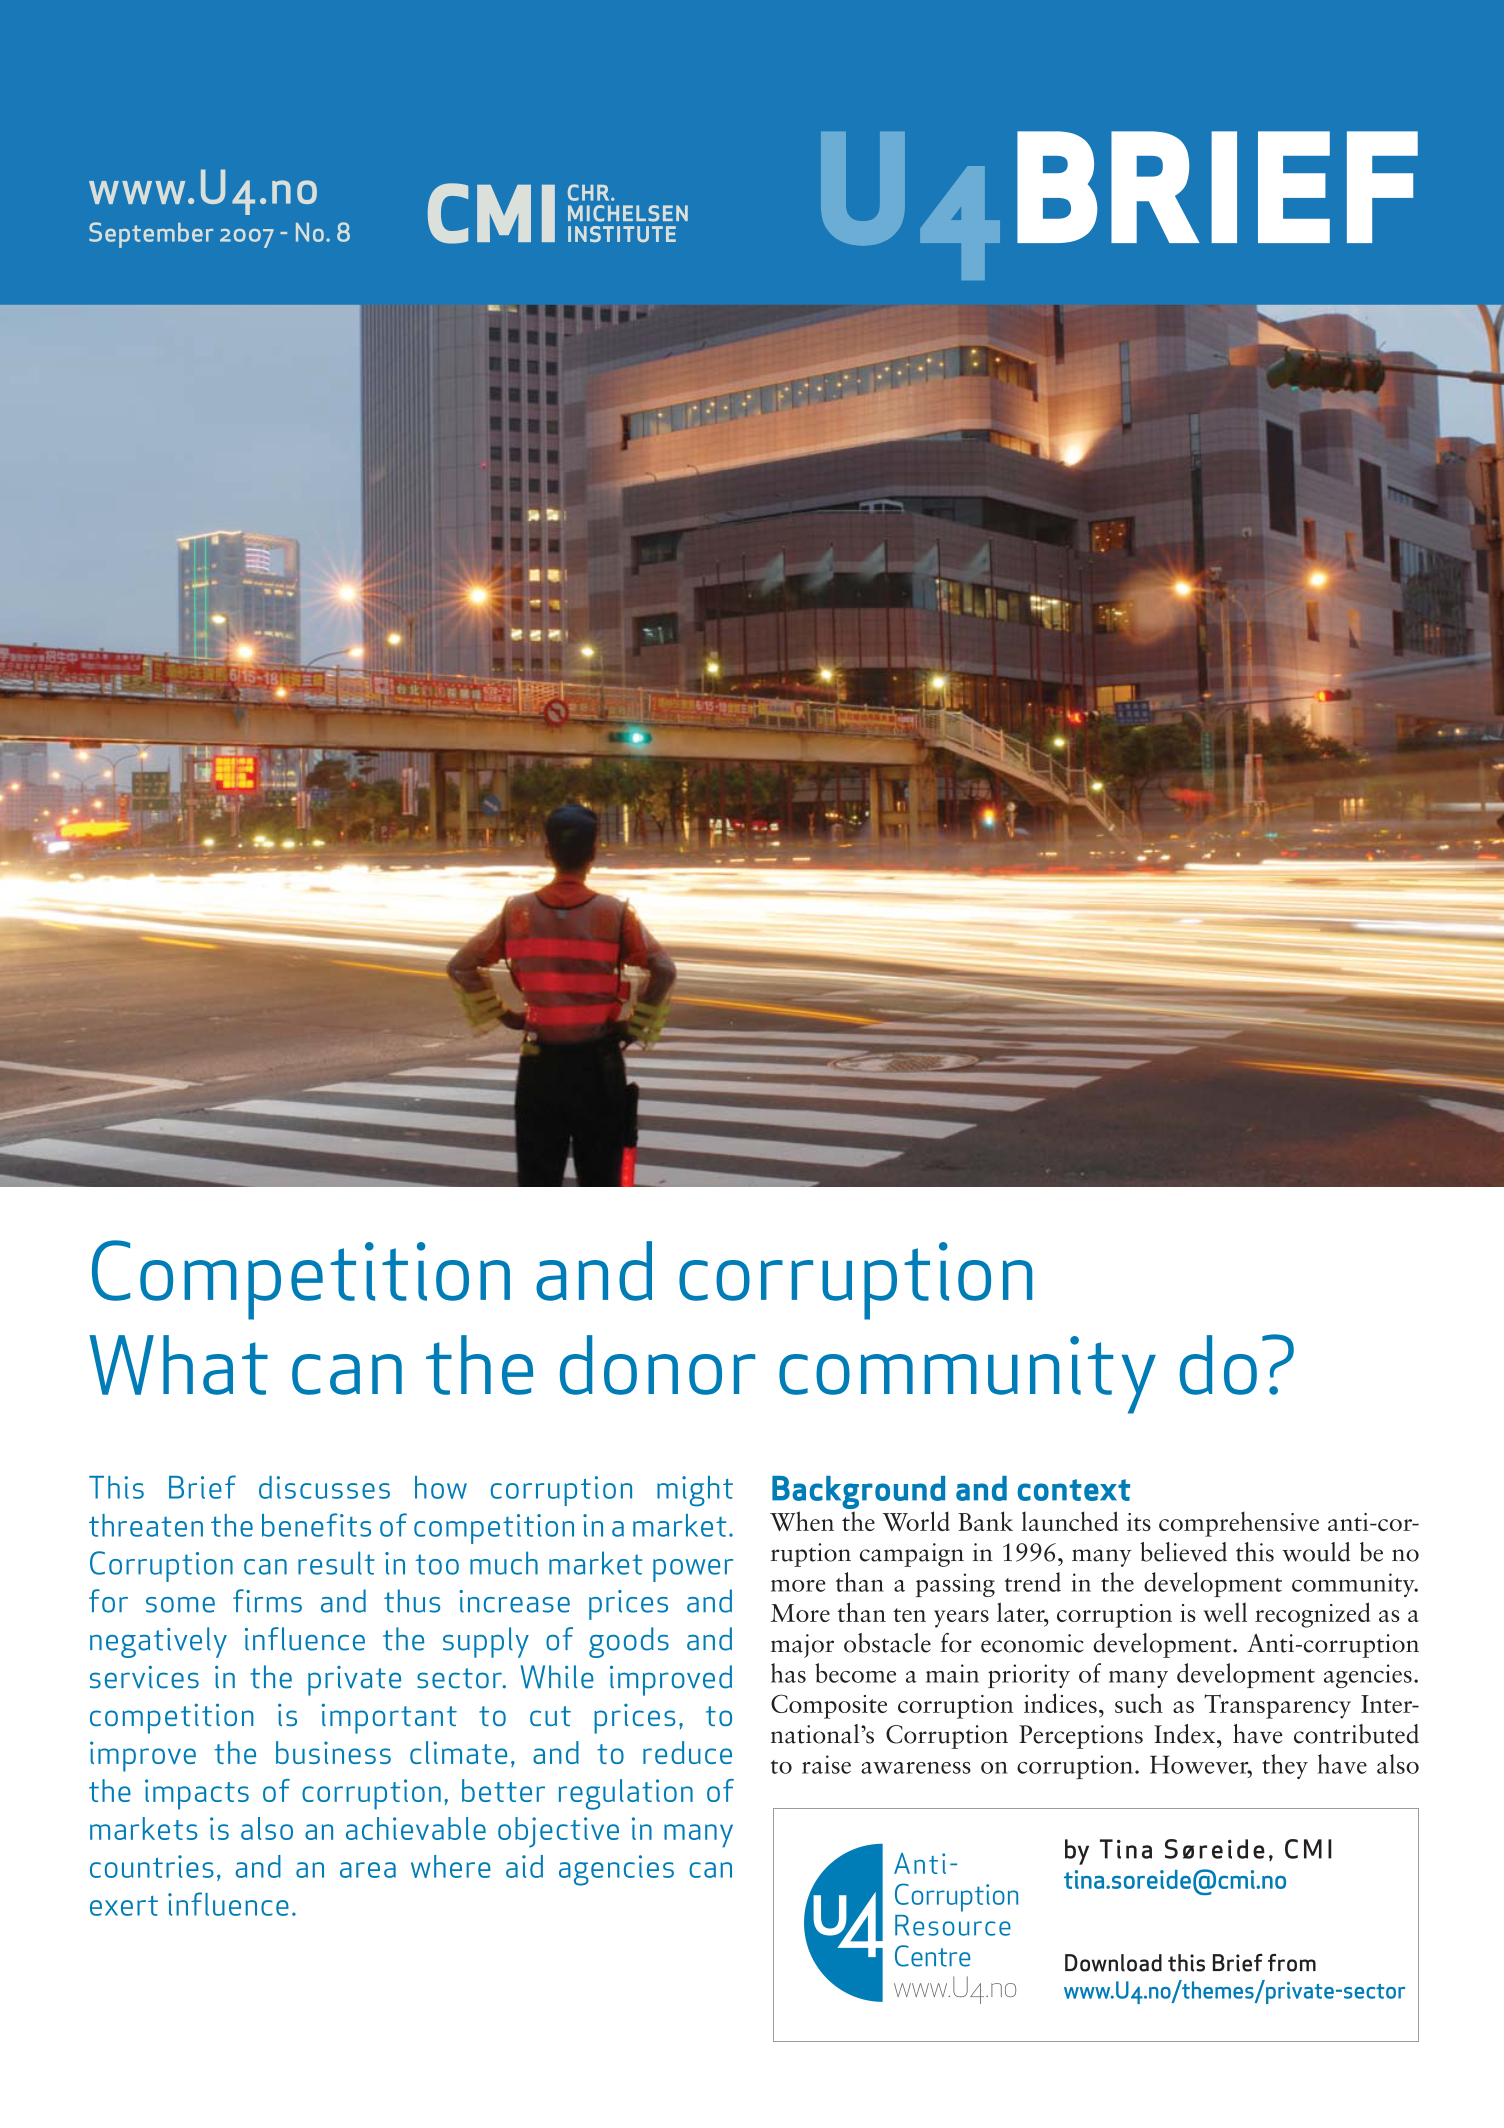 Competition and corruption. What can the donor community do?